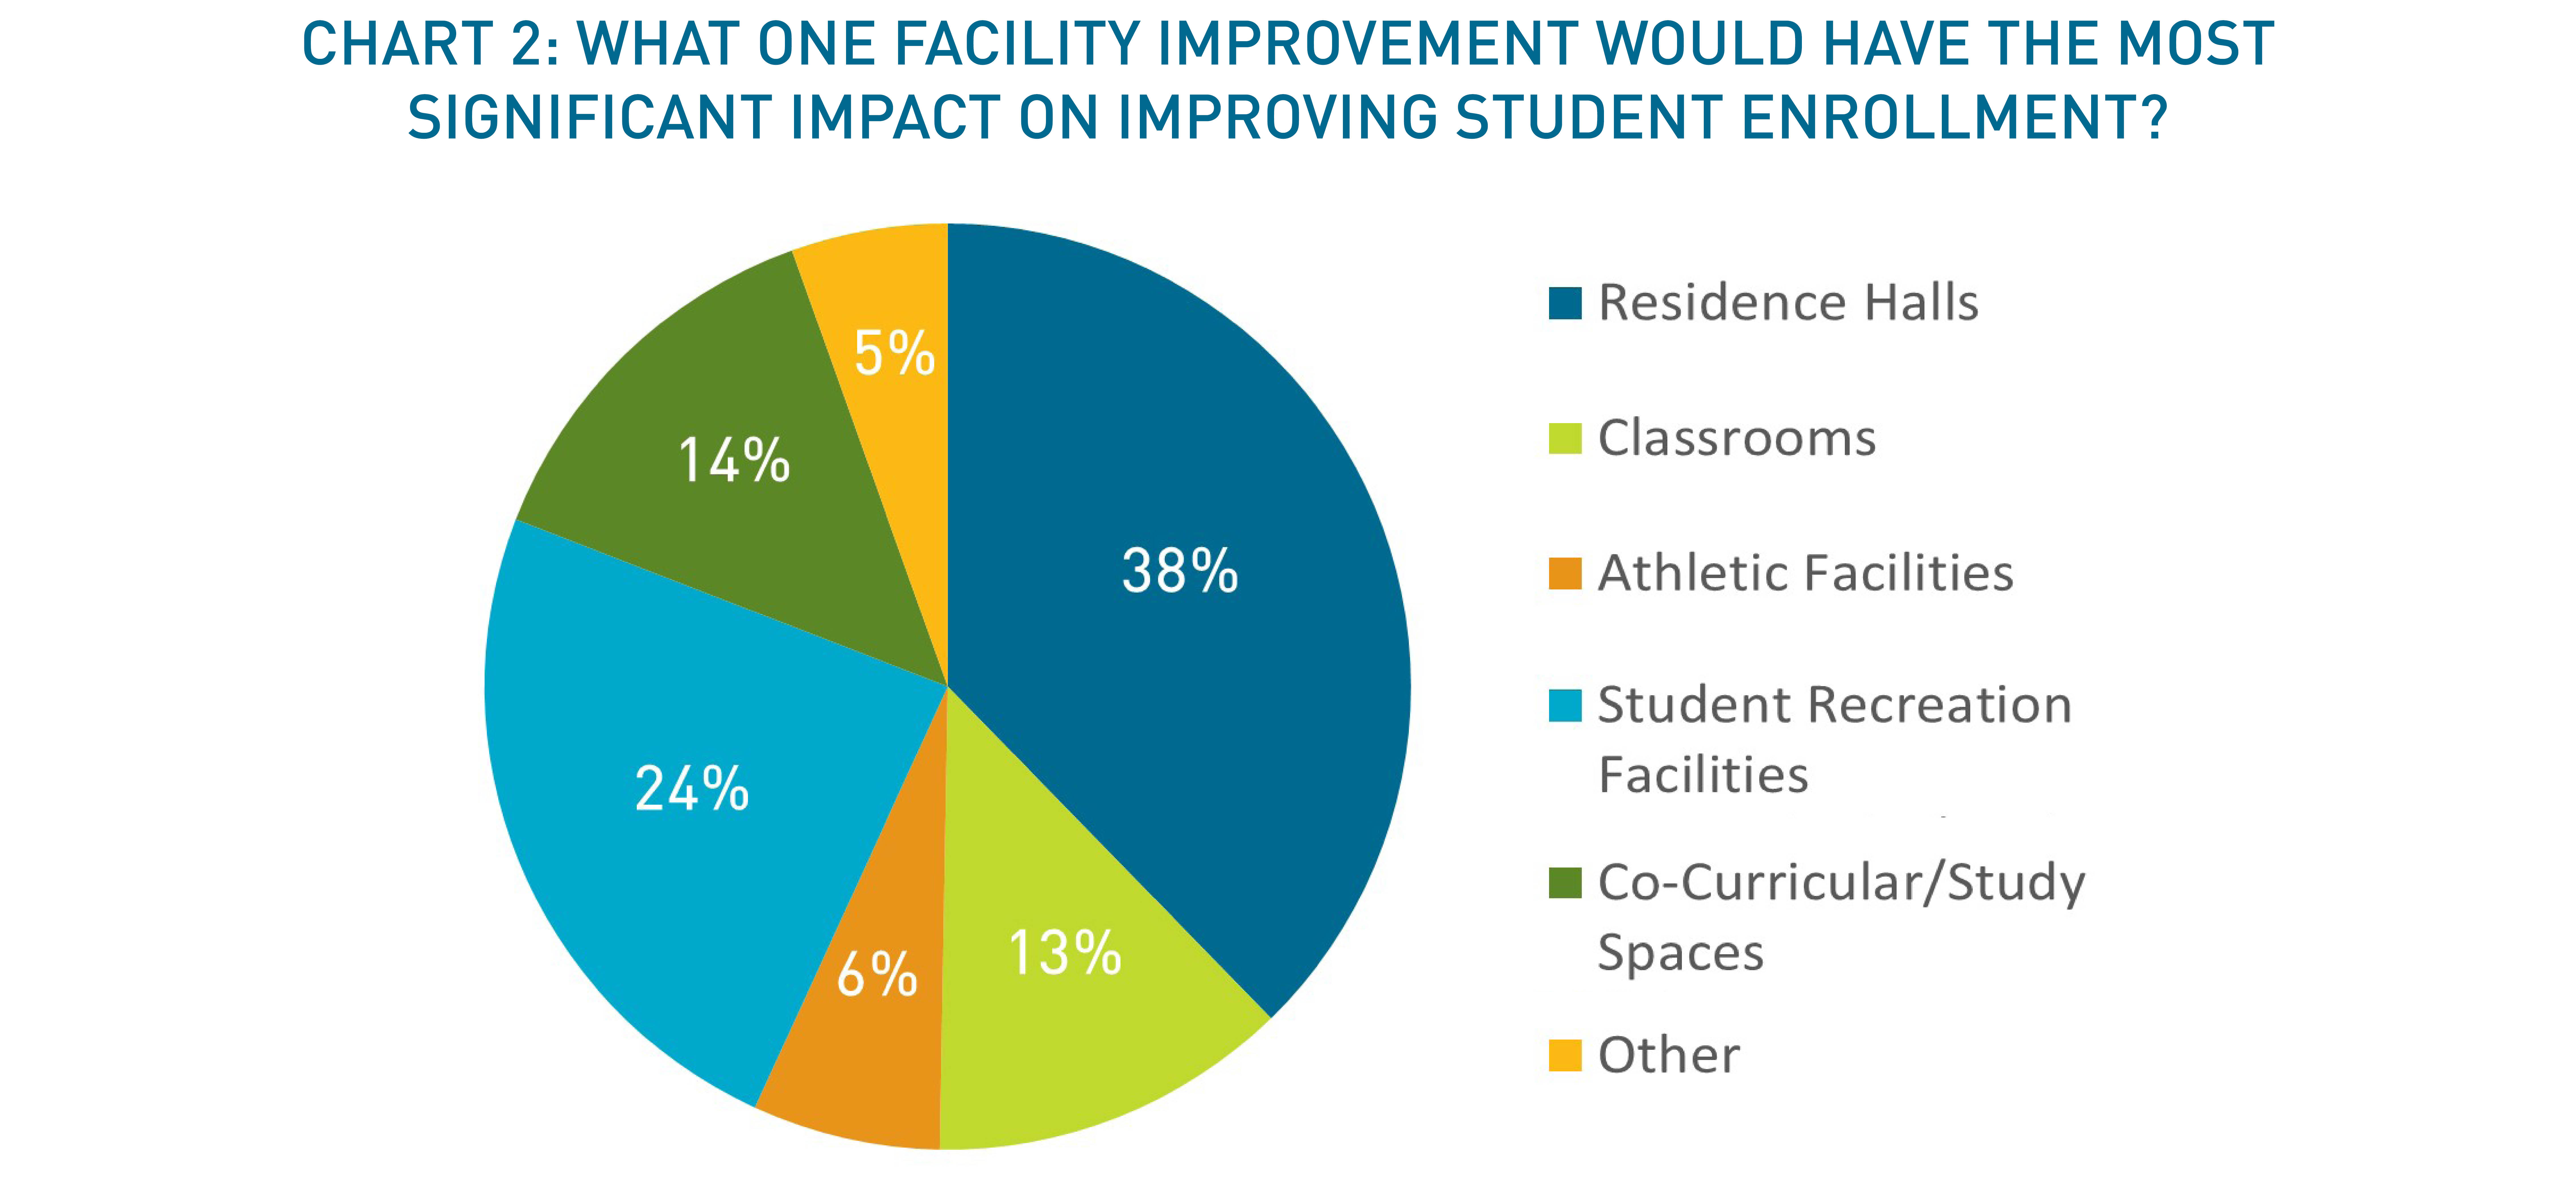 A pie chart shows which facility improvement would have the most impact